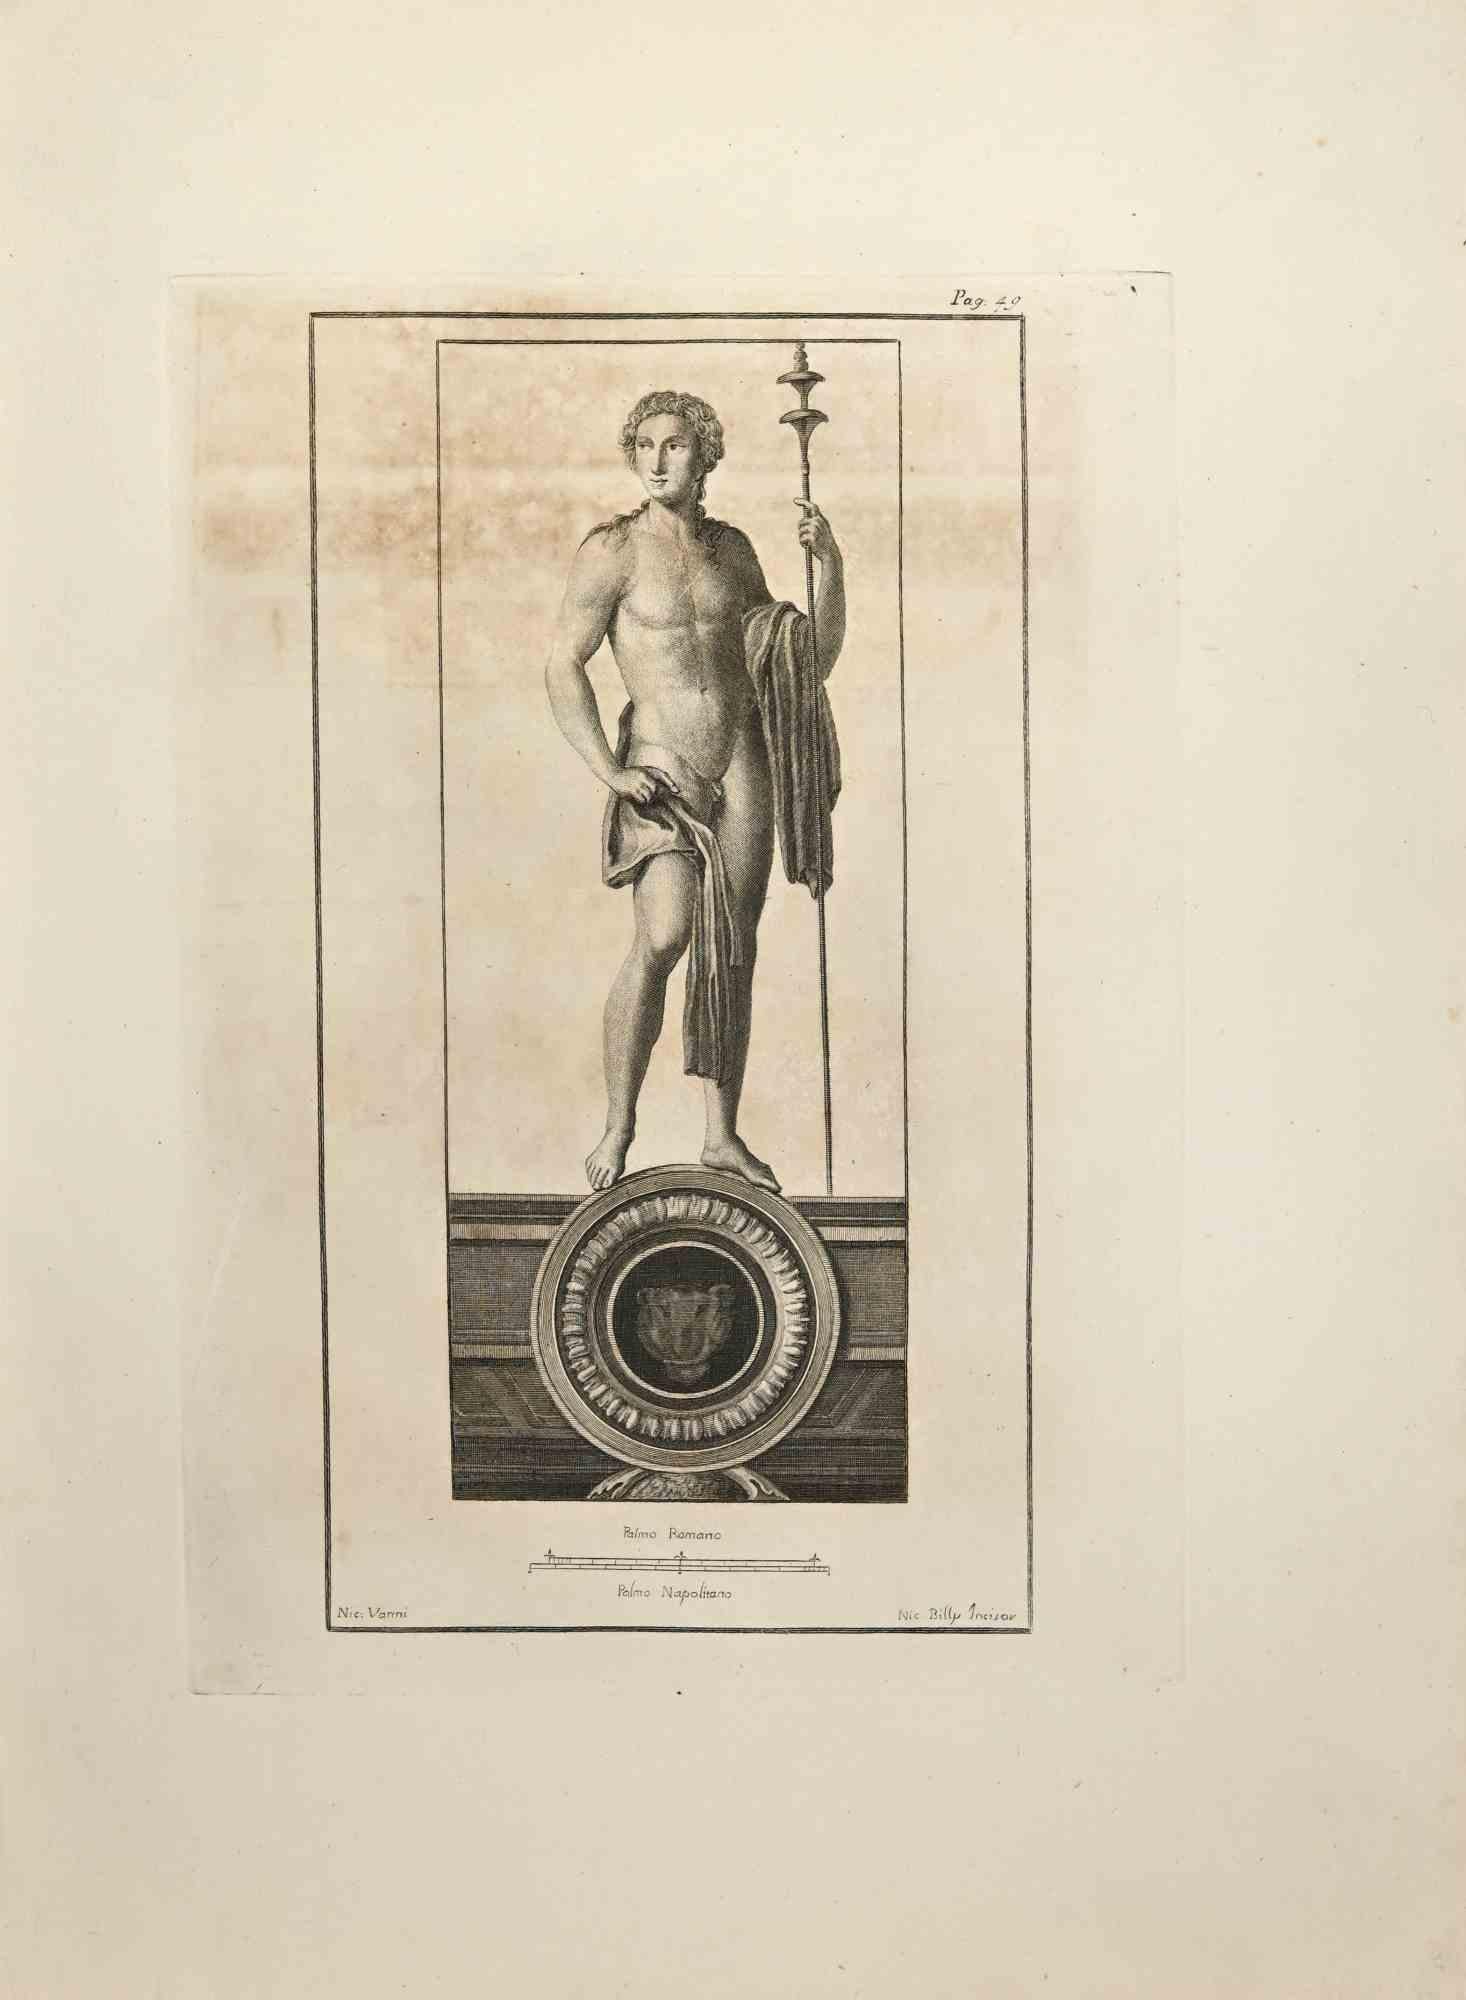 Ancient Roman Fresco from "Antiquities of Herculaneum" is an etching on paper realized by Nicola Billy in the 18th Century.

Signed on the plate.

Good conditions with some foxing and folding due to the time.

The etching belongs to the print suite